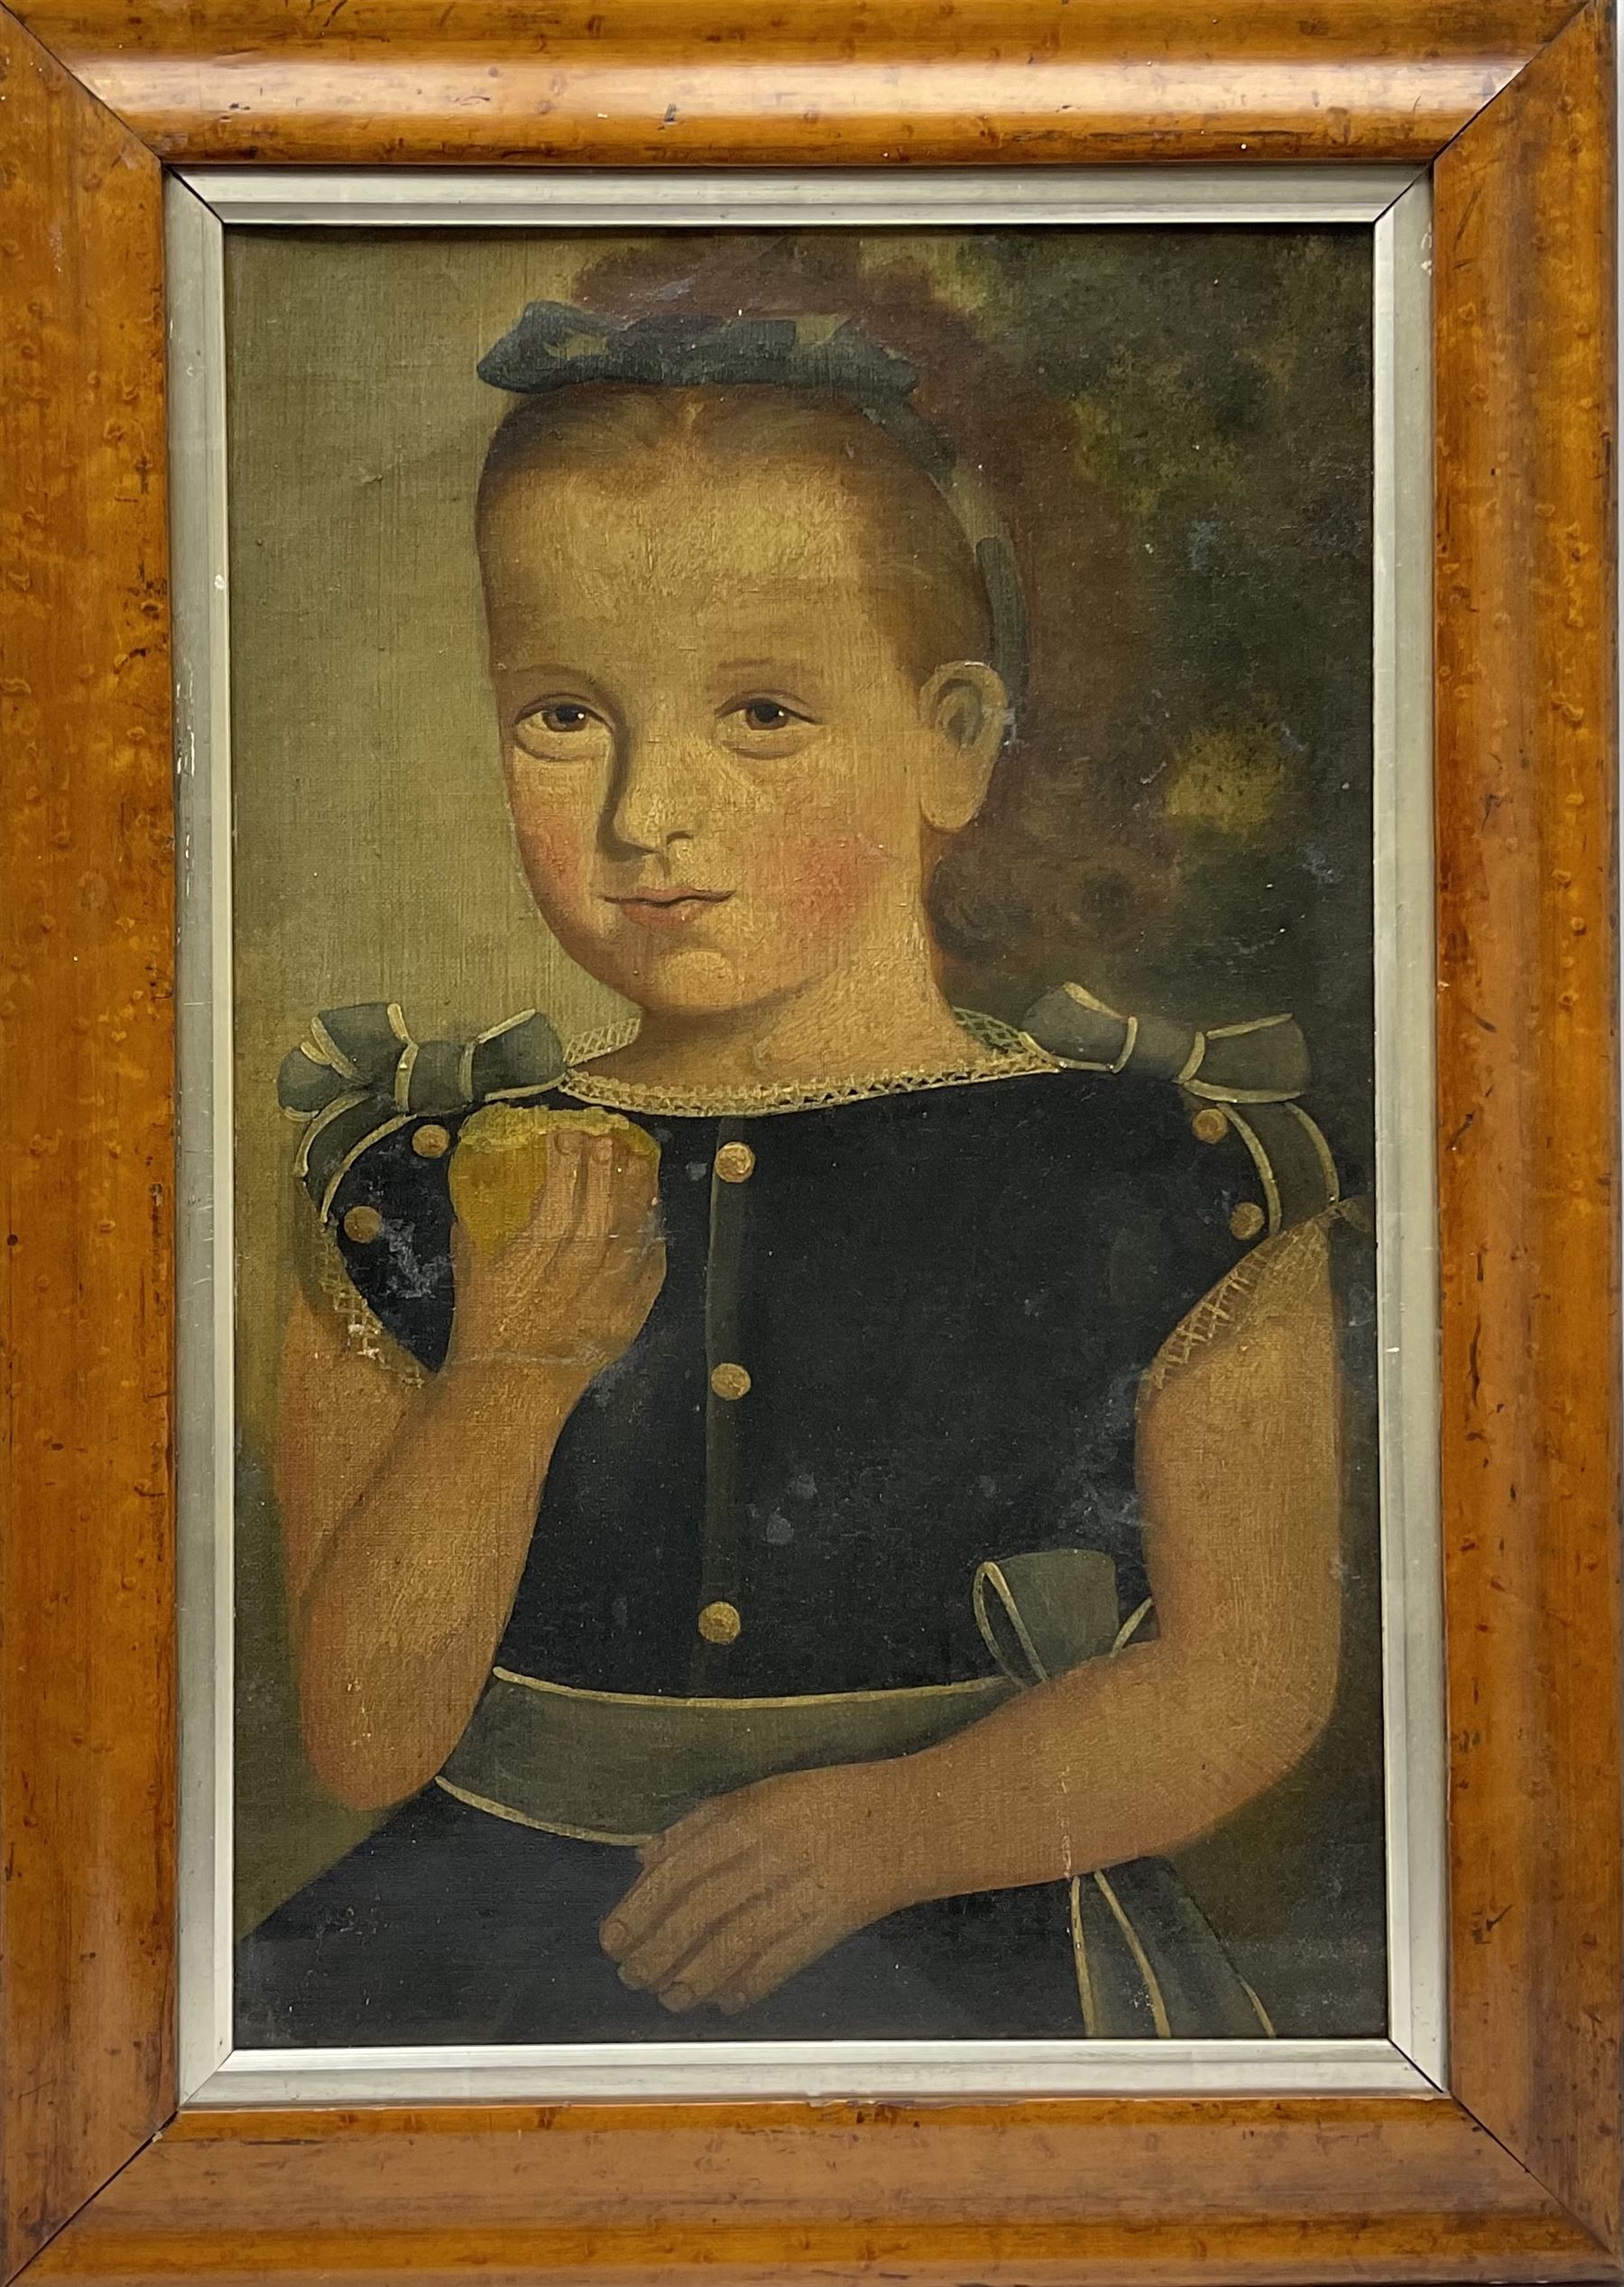 American Primitive School (19th century): Girl in a Blue Dress - Image 2 of 3